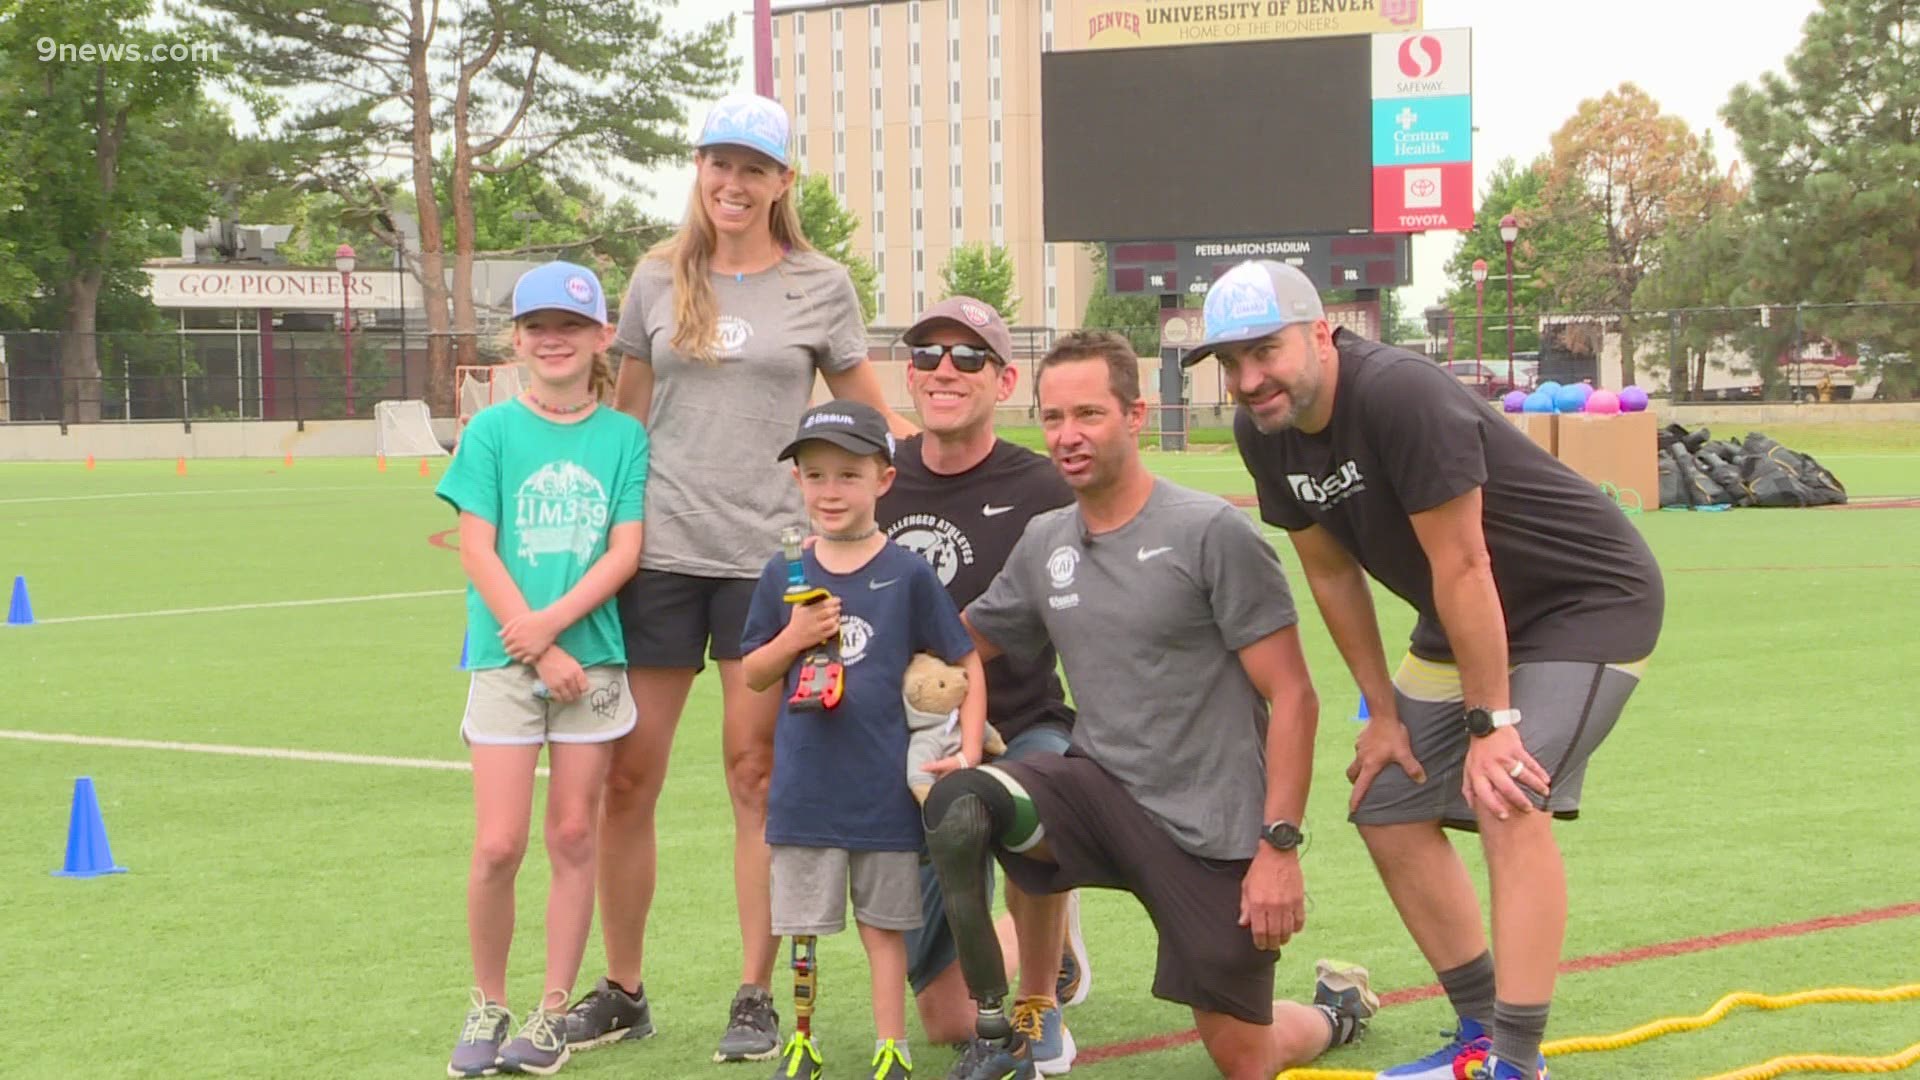 The first running and mobility clinic for Denver area amputees was held Saturday. A 6-year-old boy is getting a surprise of a running prosthetic leg.